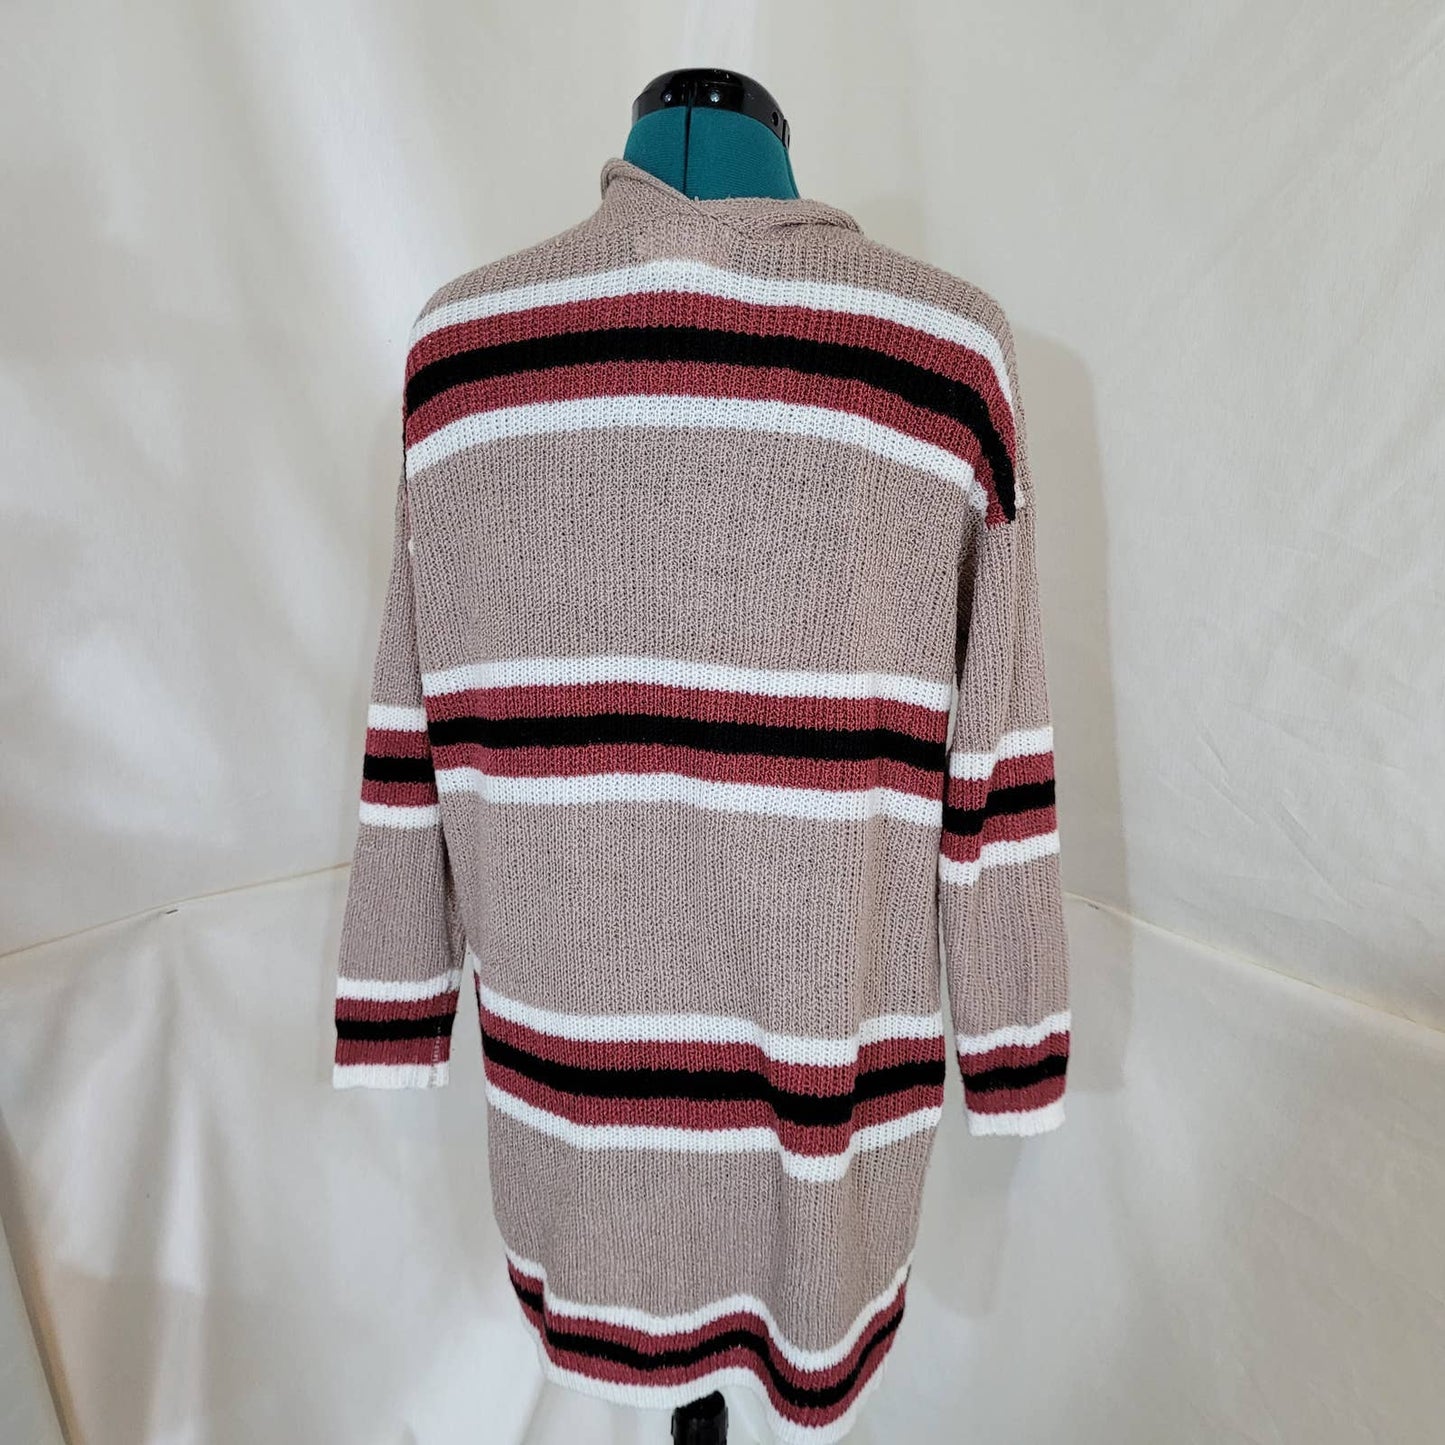 Dreamers Knit Striped Cardigan - Size Extra Large